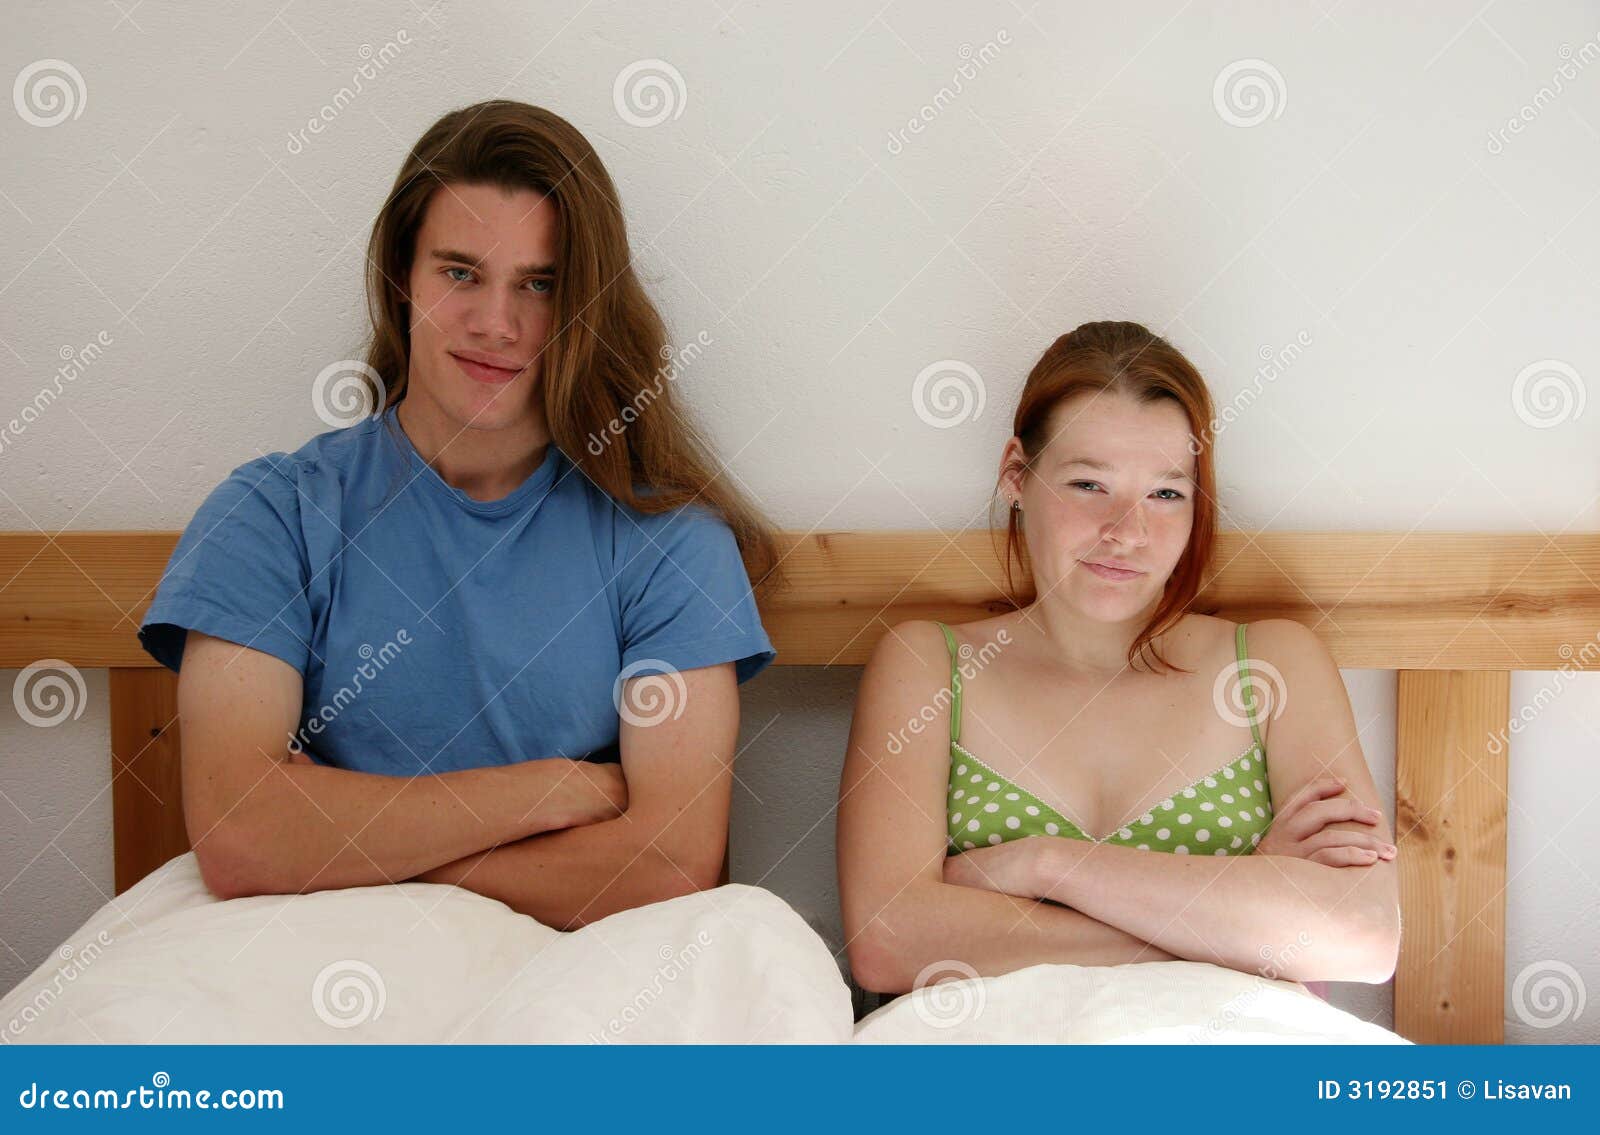 pleased man disappointed woman